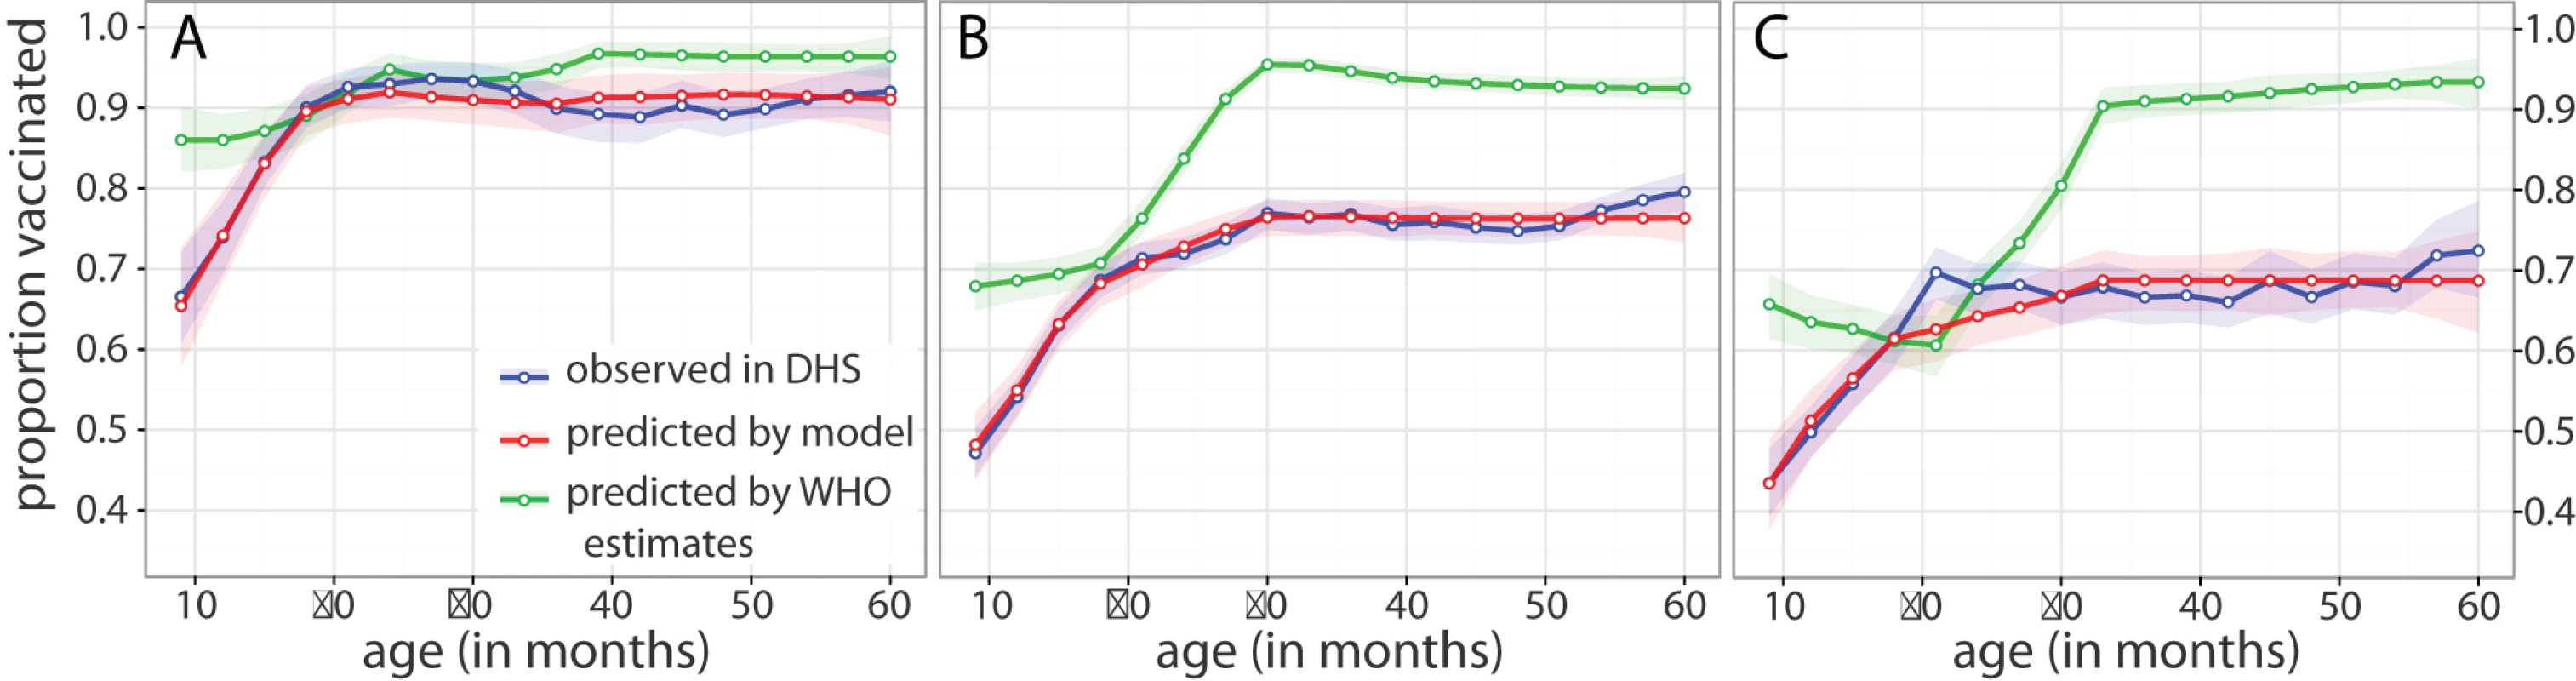 DHS and model estimates of age-specific vaccination coverage.